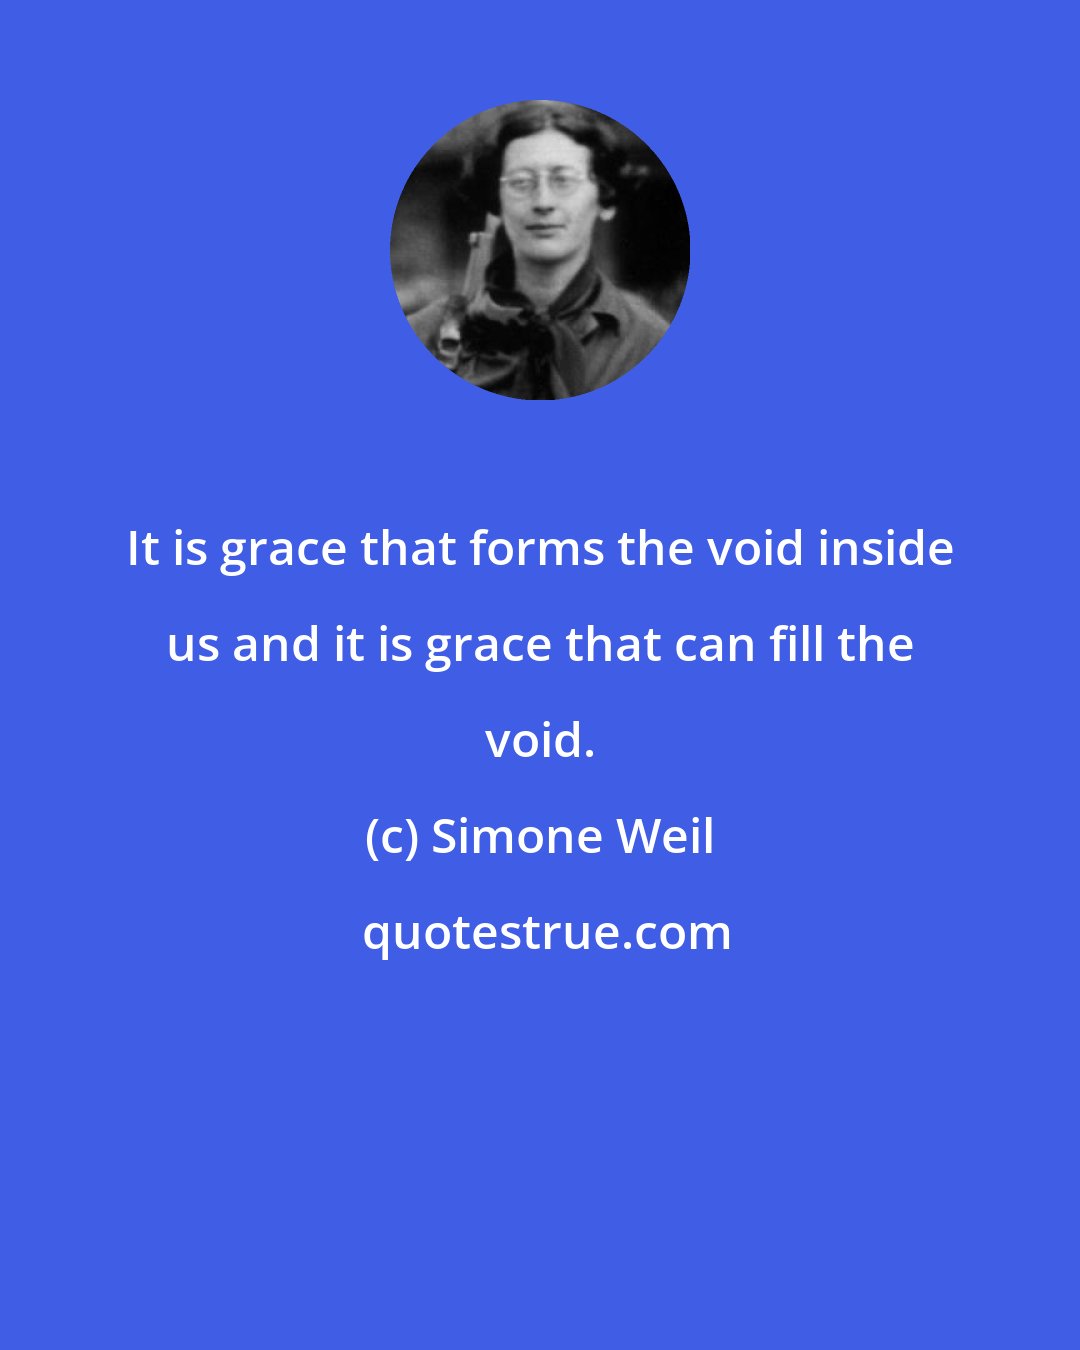 Simone Weil: It is grace that forms the void inside us and it is grace that can fill the void.